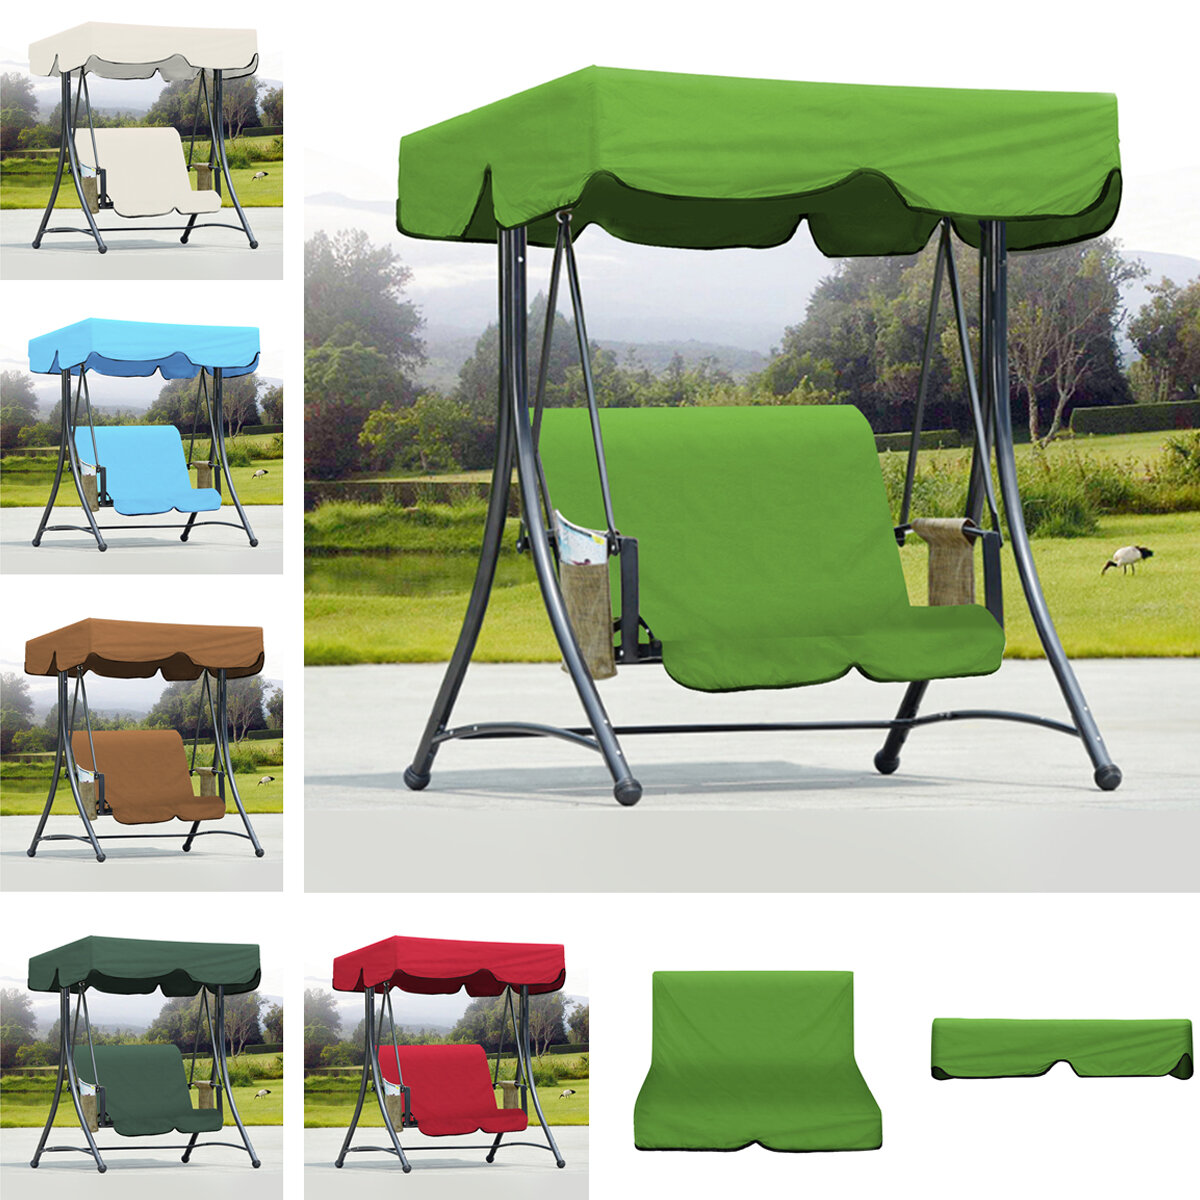 Outdoor Garden Swing Bench Hammock Canopy Waterproof Top Cover Sunshade + 2 Seater Chair Cover